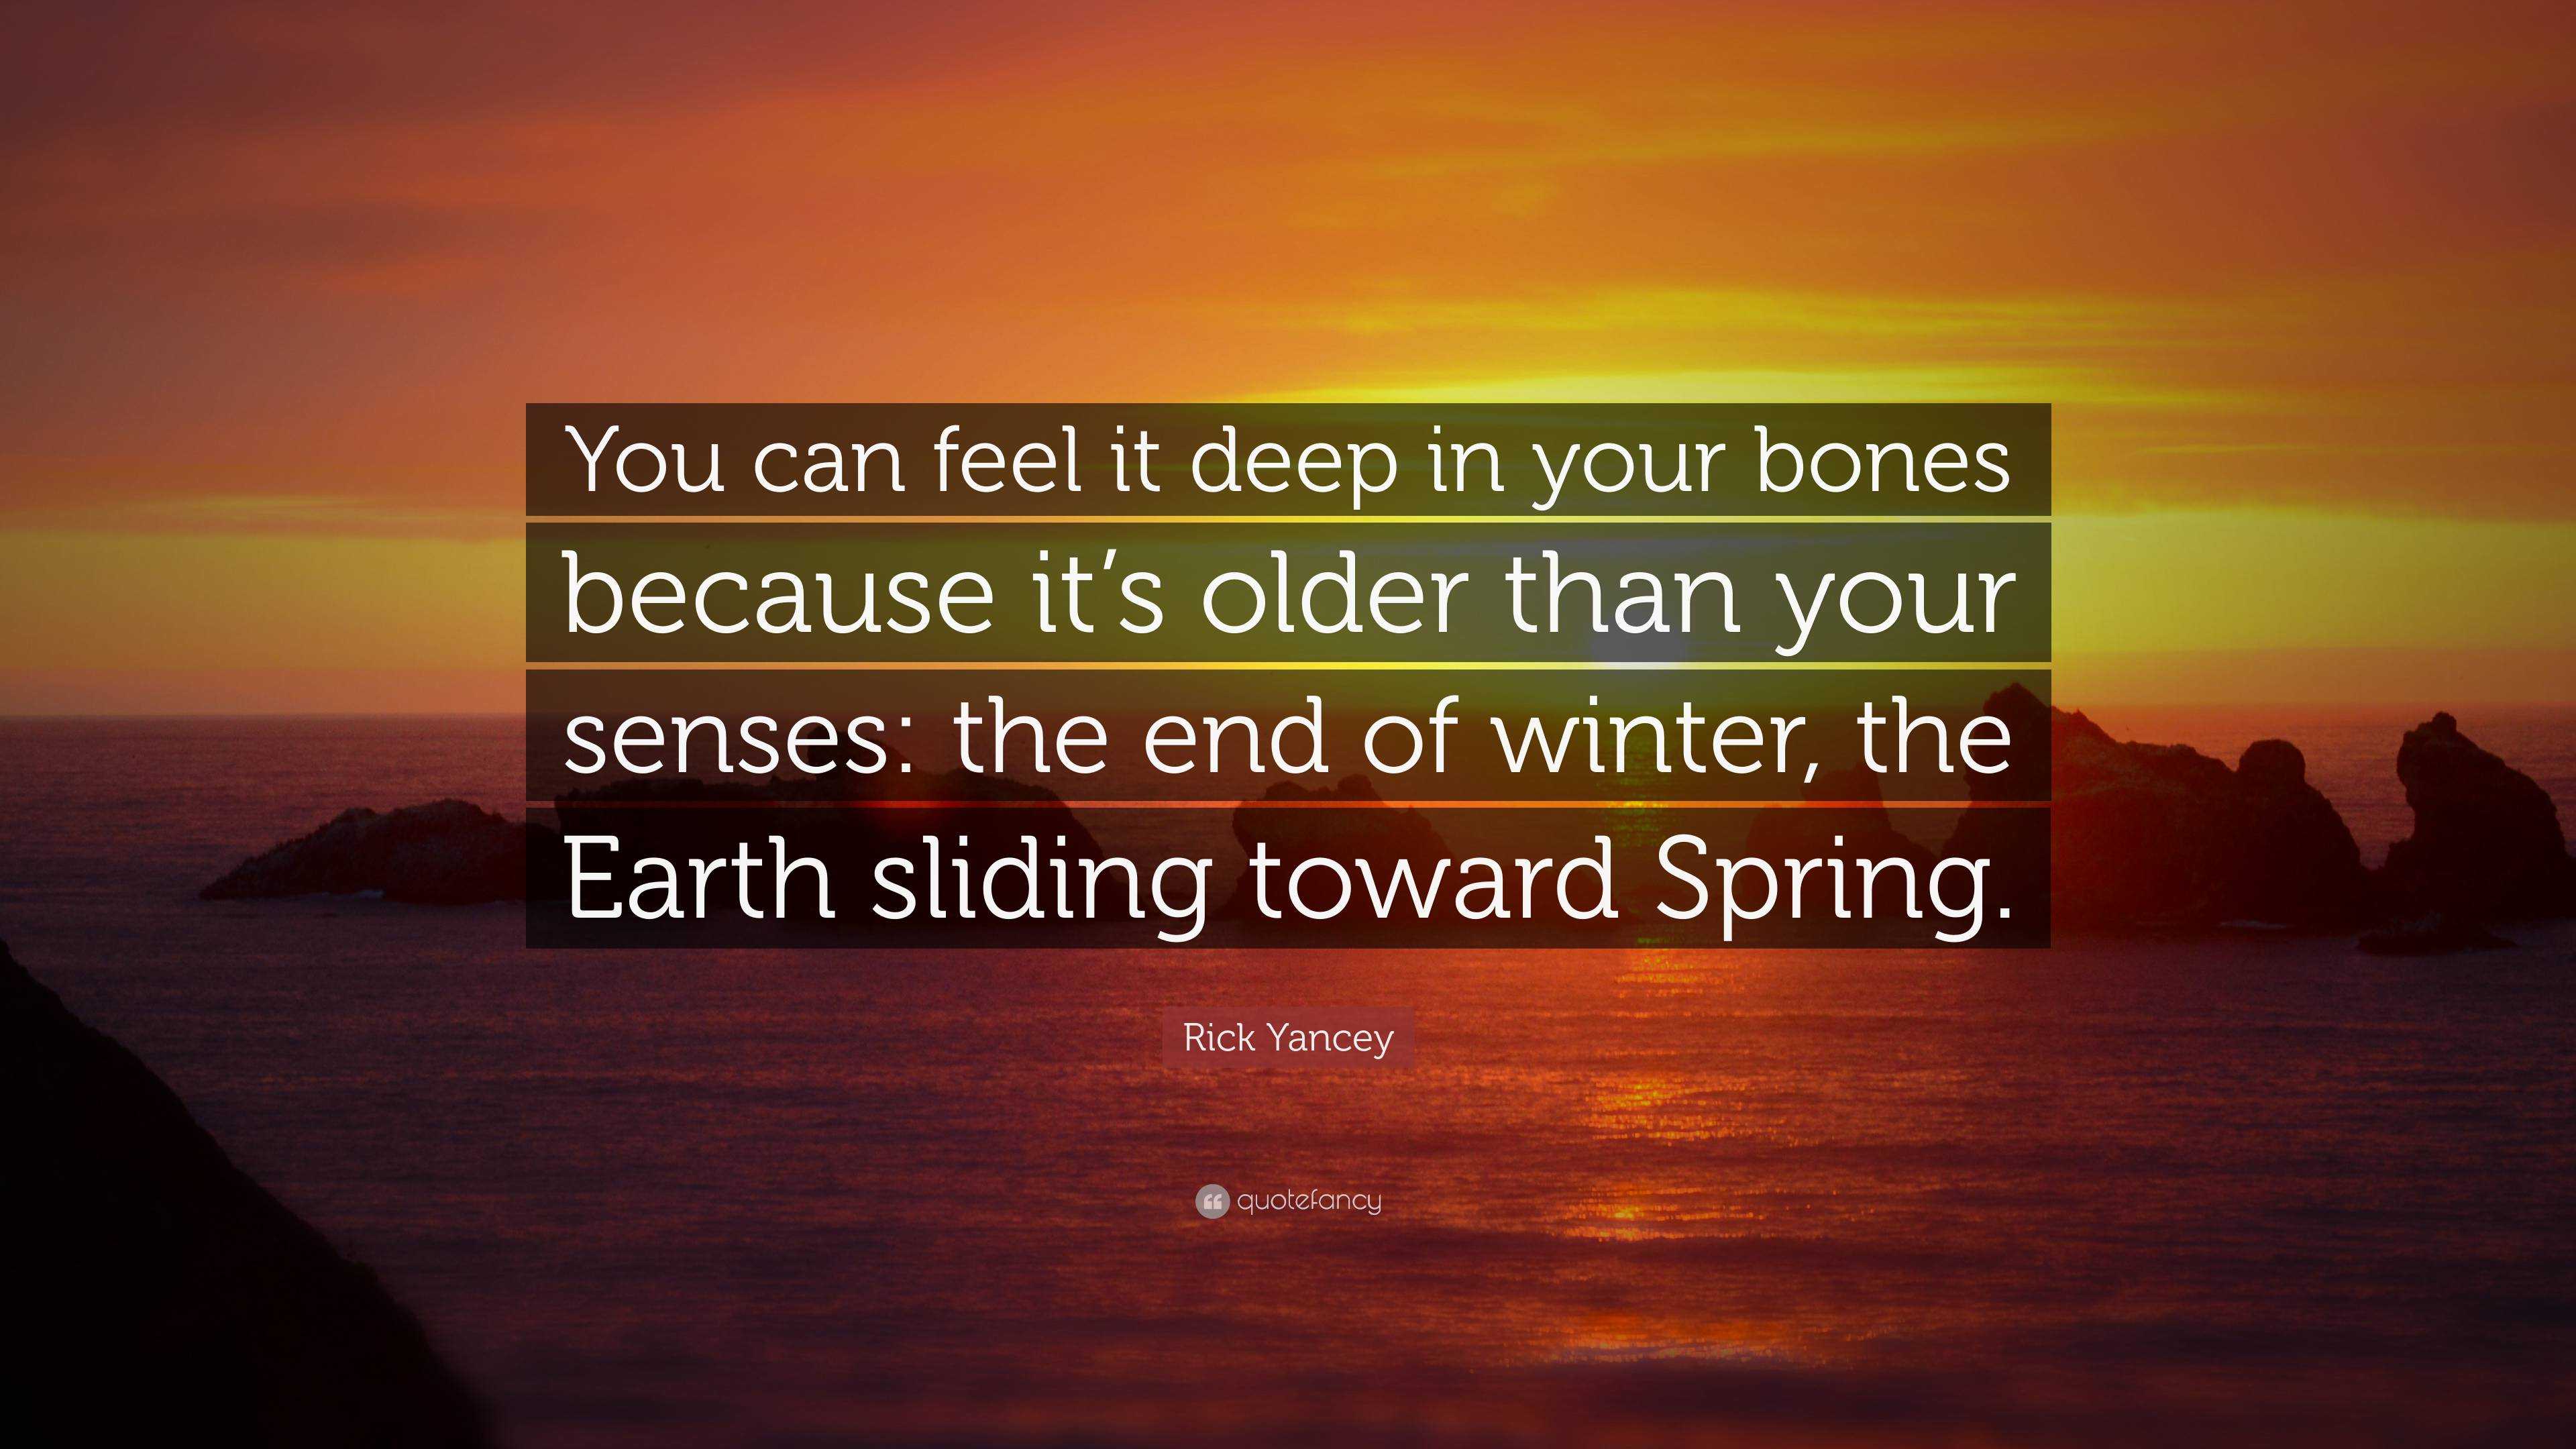 Rick Yancey Quote You Can Feel It Deep In Your Bones Because It S Older Than Your Senses The End Of Winter The Earth Sliding Toward Spri